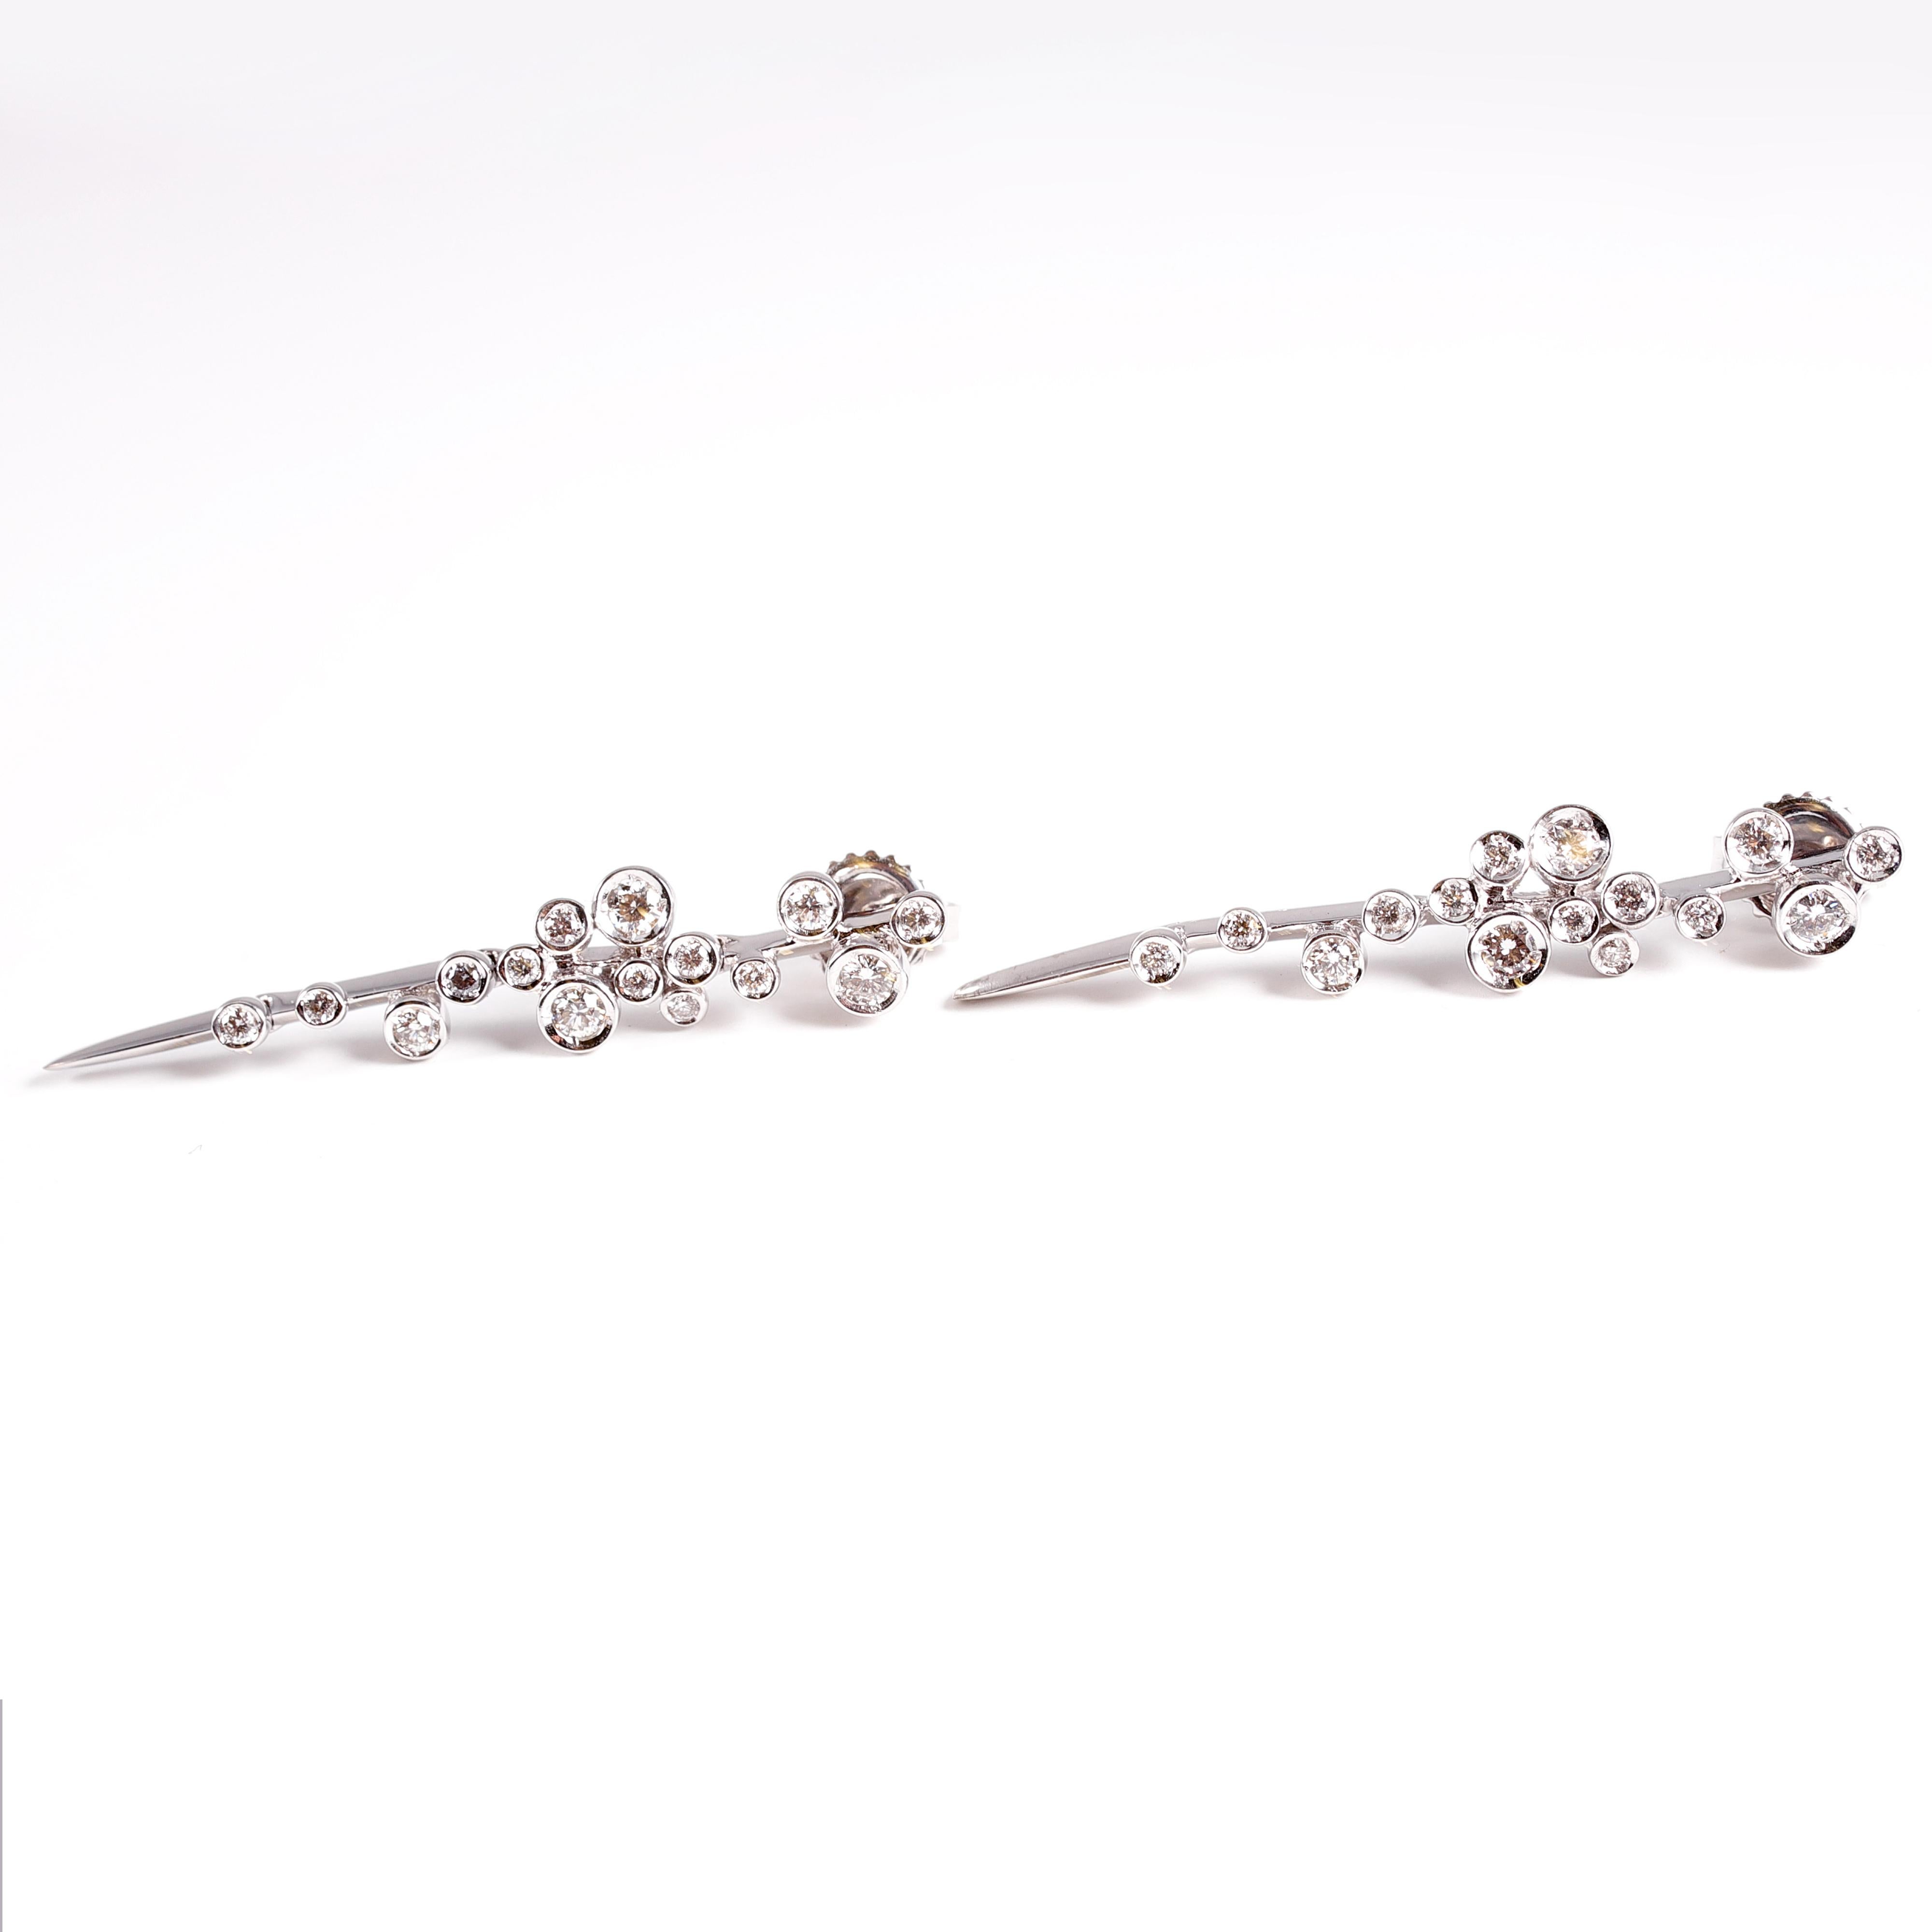 Women's or Men's David Morris 0.60 Carat Diamond Earrings from The Astral Collection